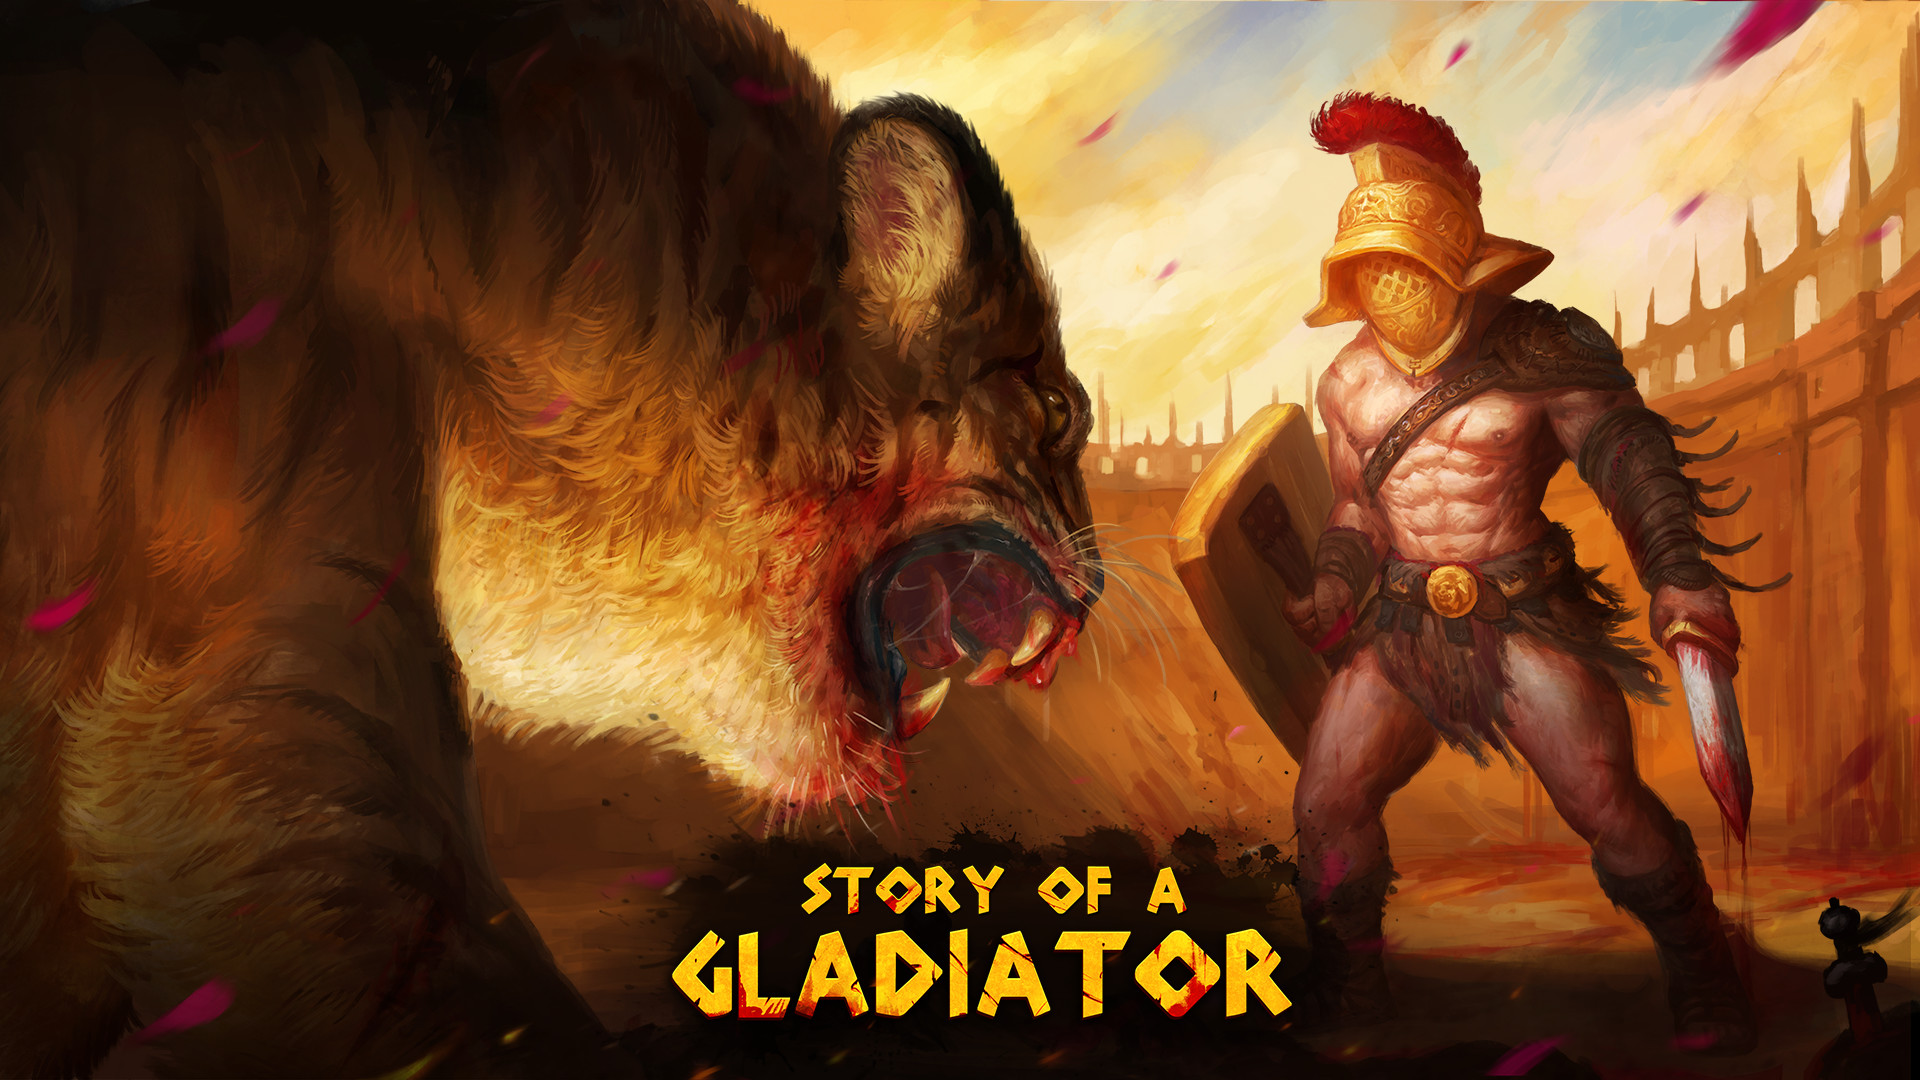 Story of a Gladiator - Soundtrack Featured Screenshot #1